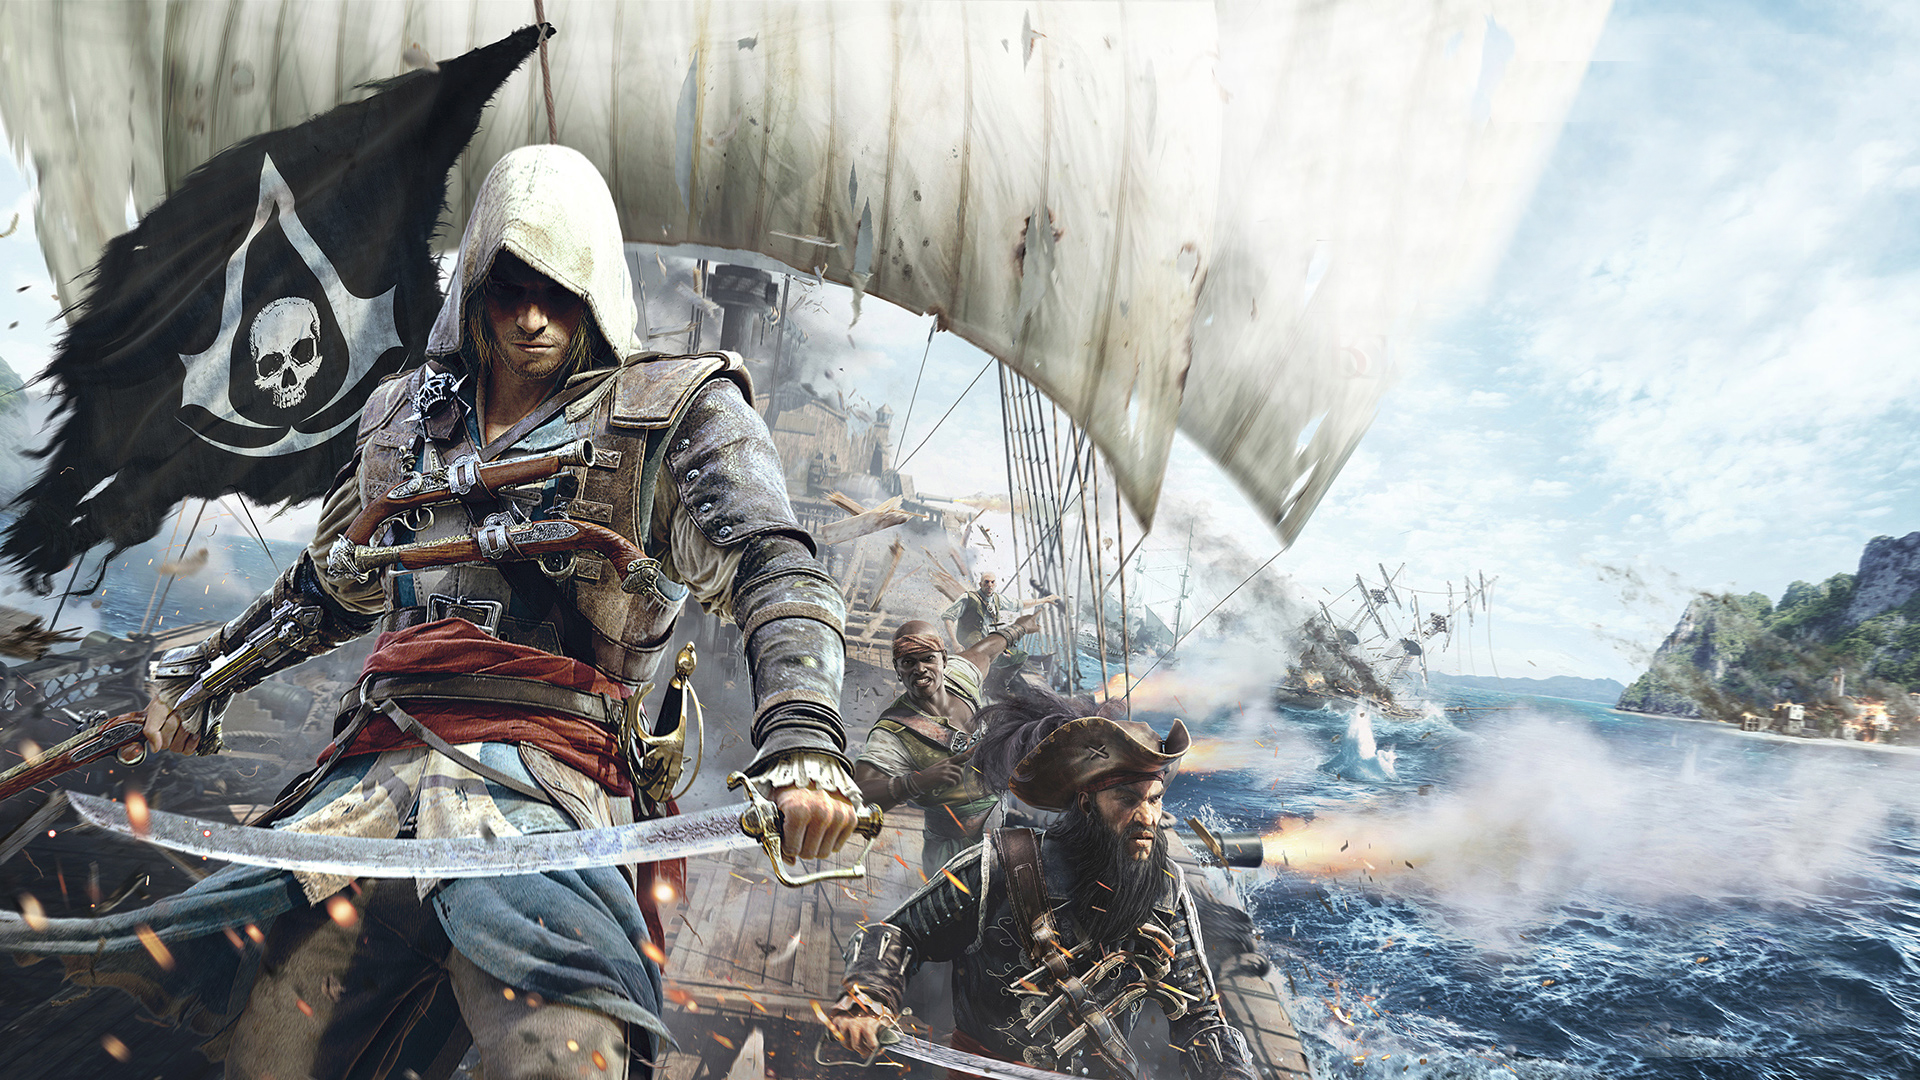 Images of Assassin's Creed IV: Black Flag | 1920x1080